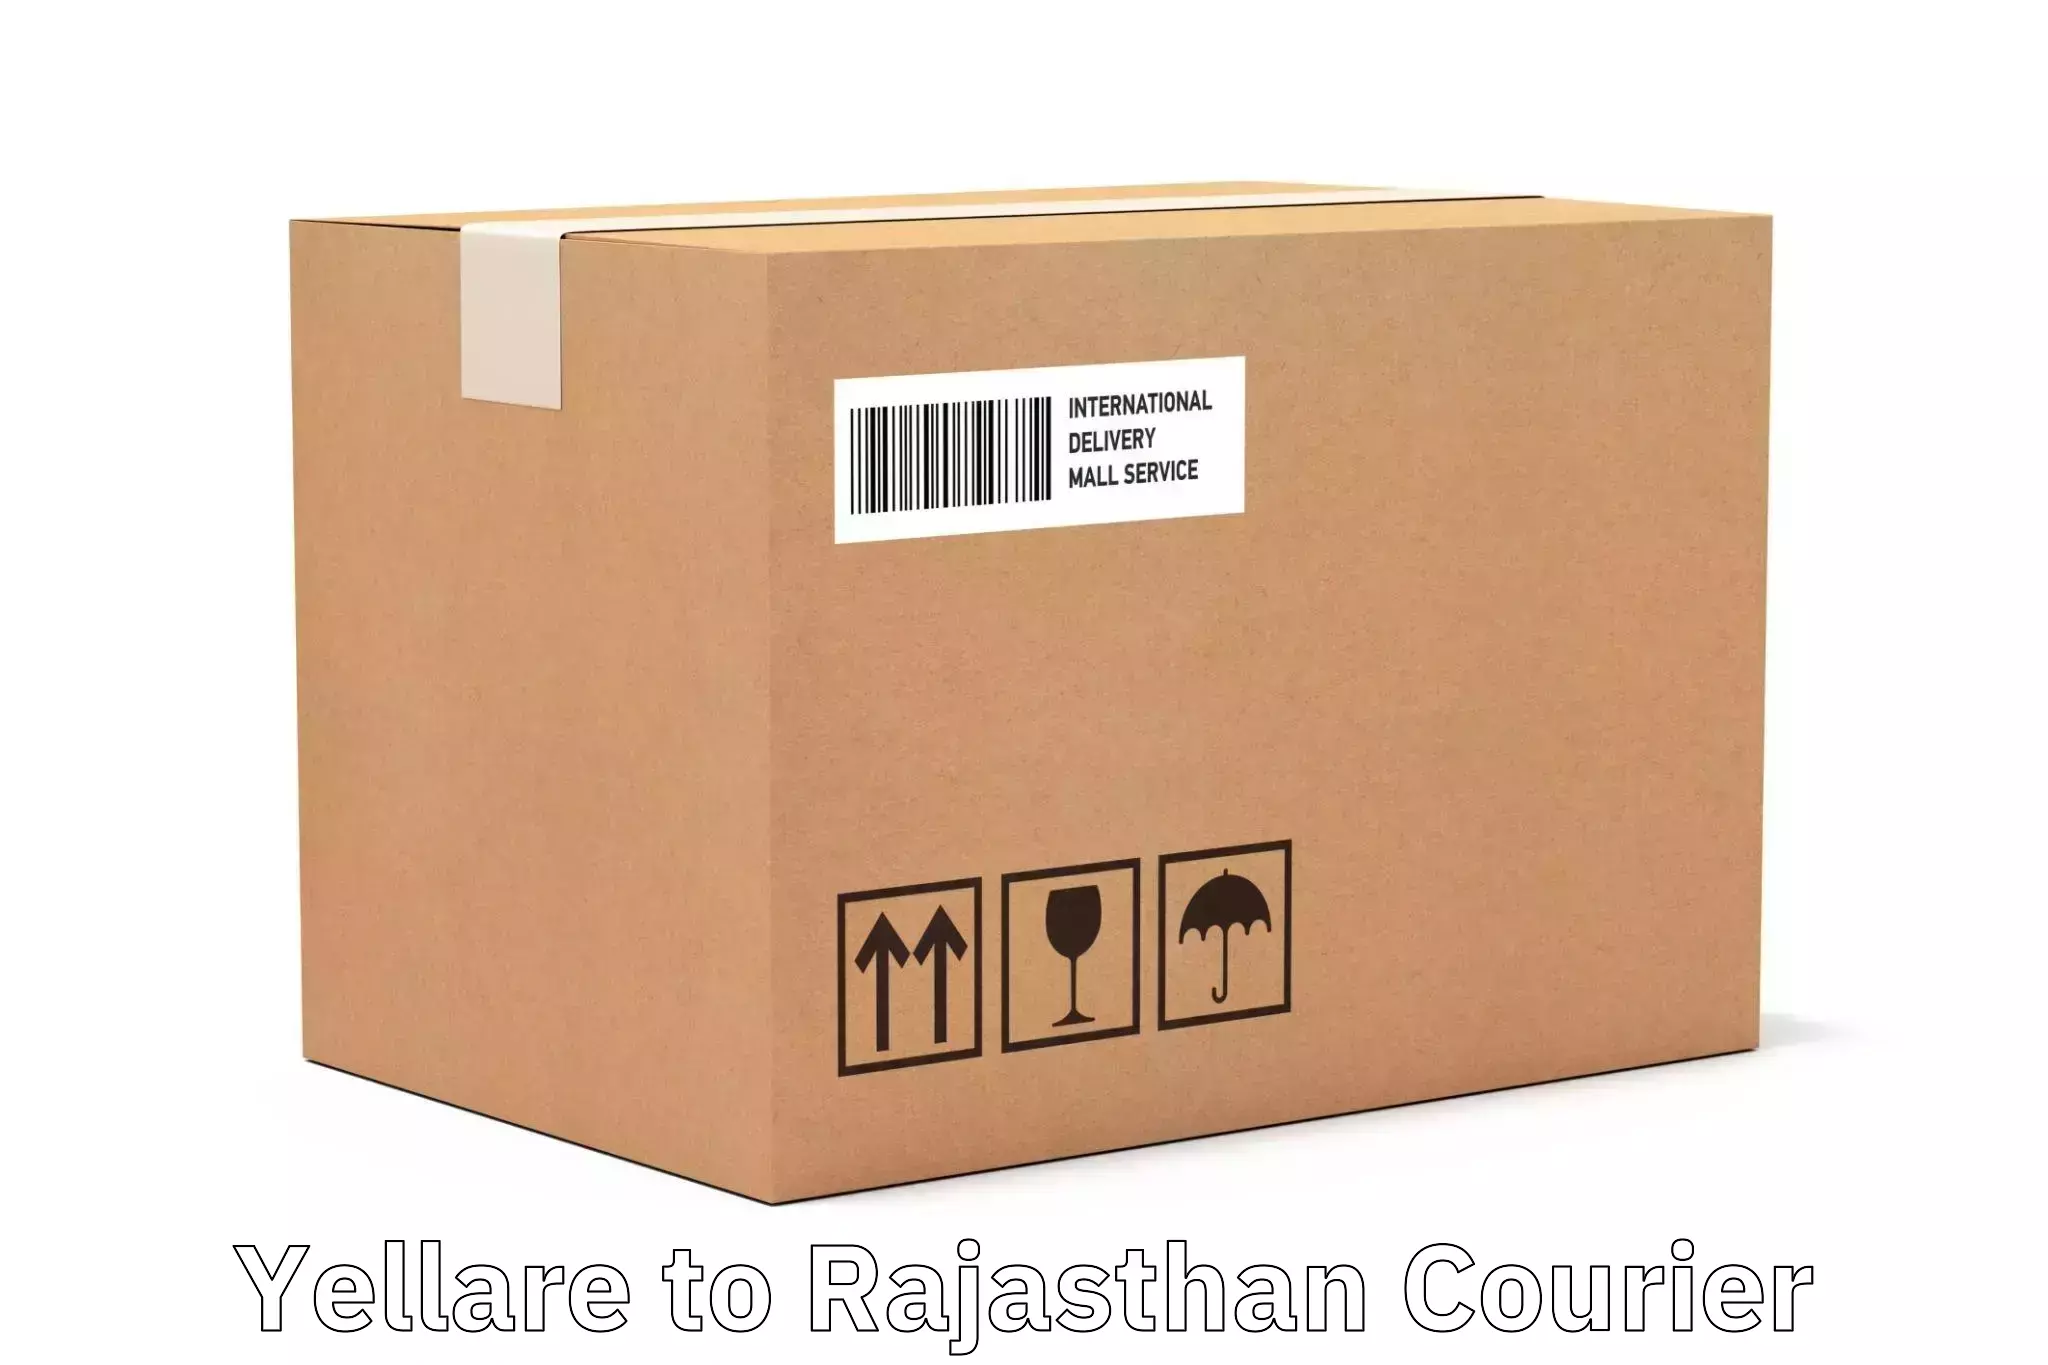 Local delivery service Yellare to Rajasthan